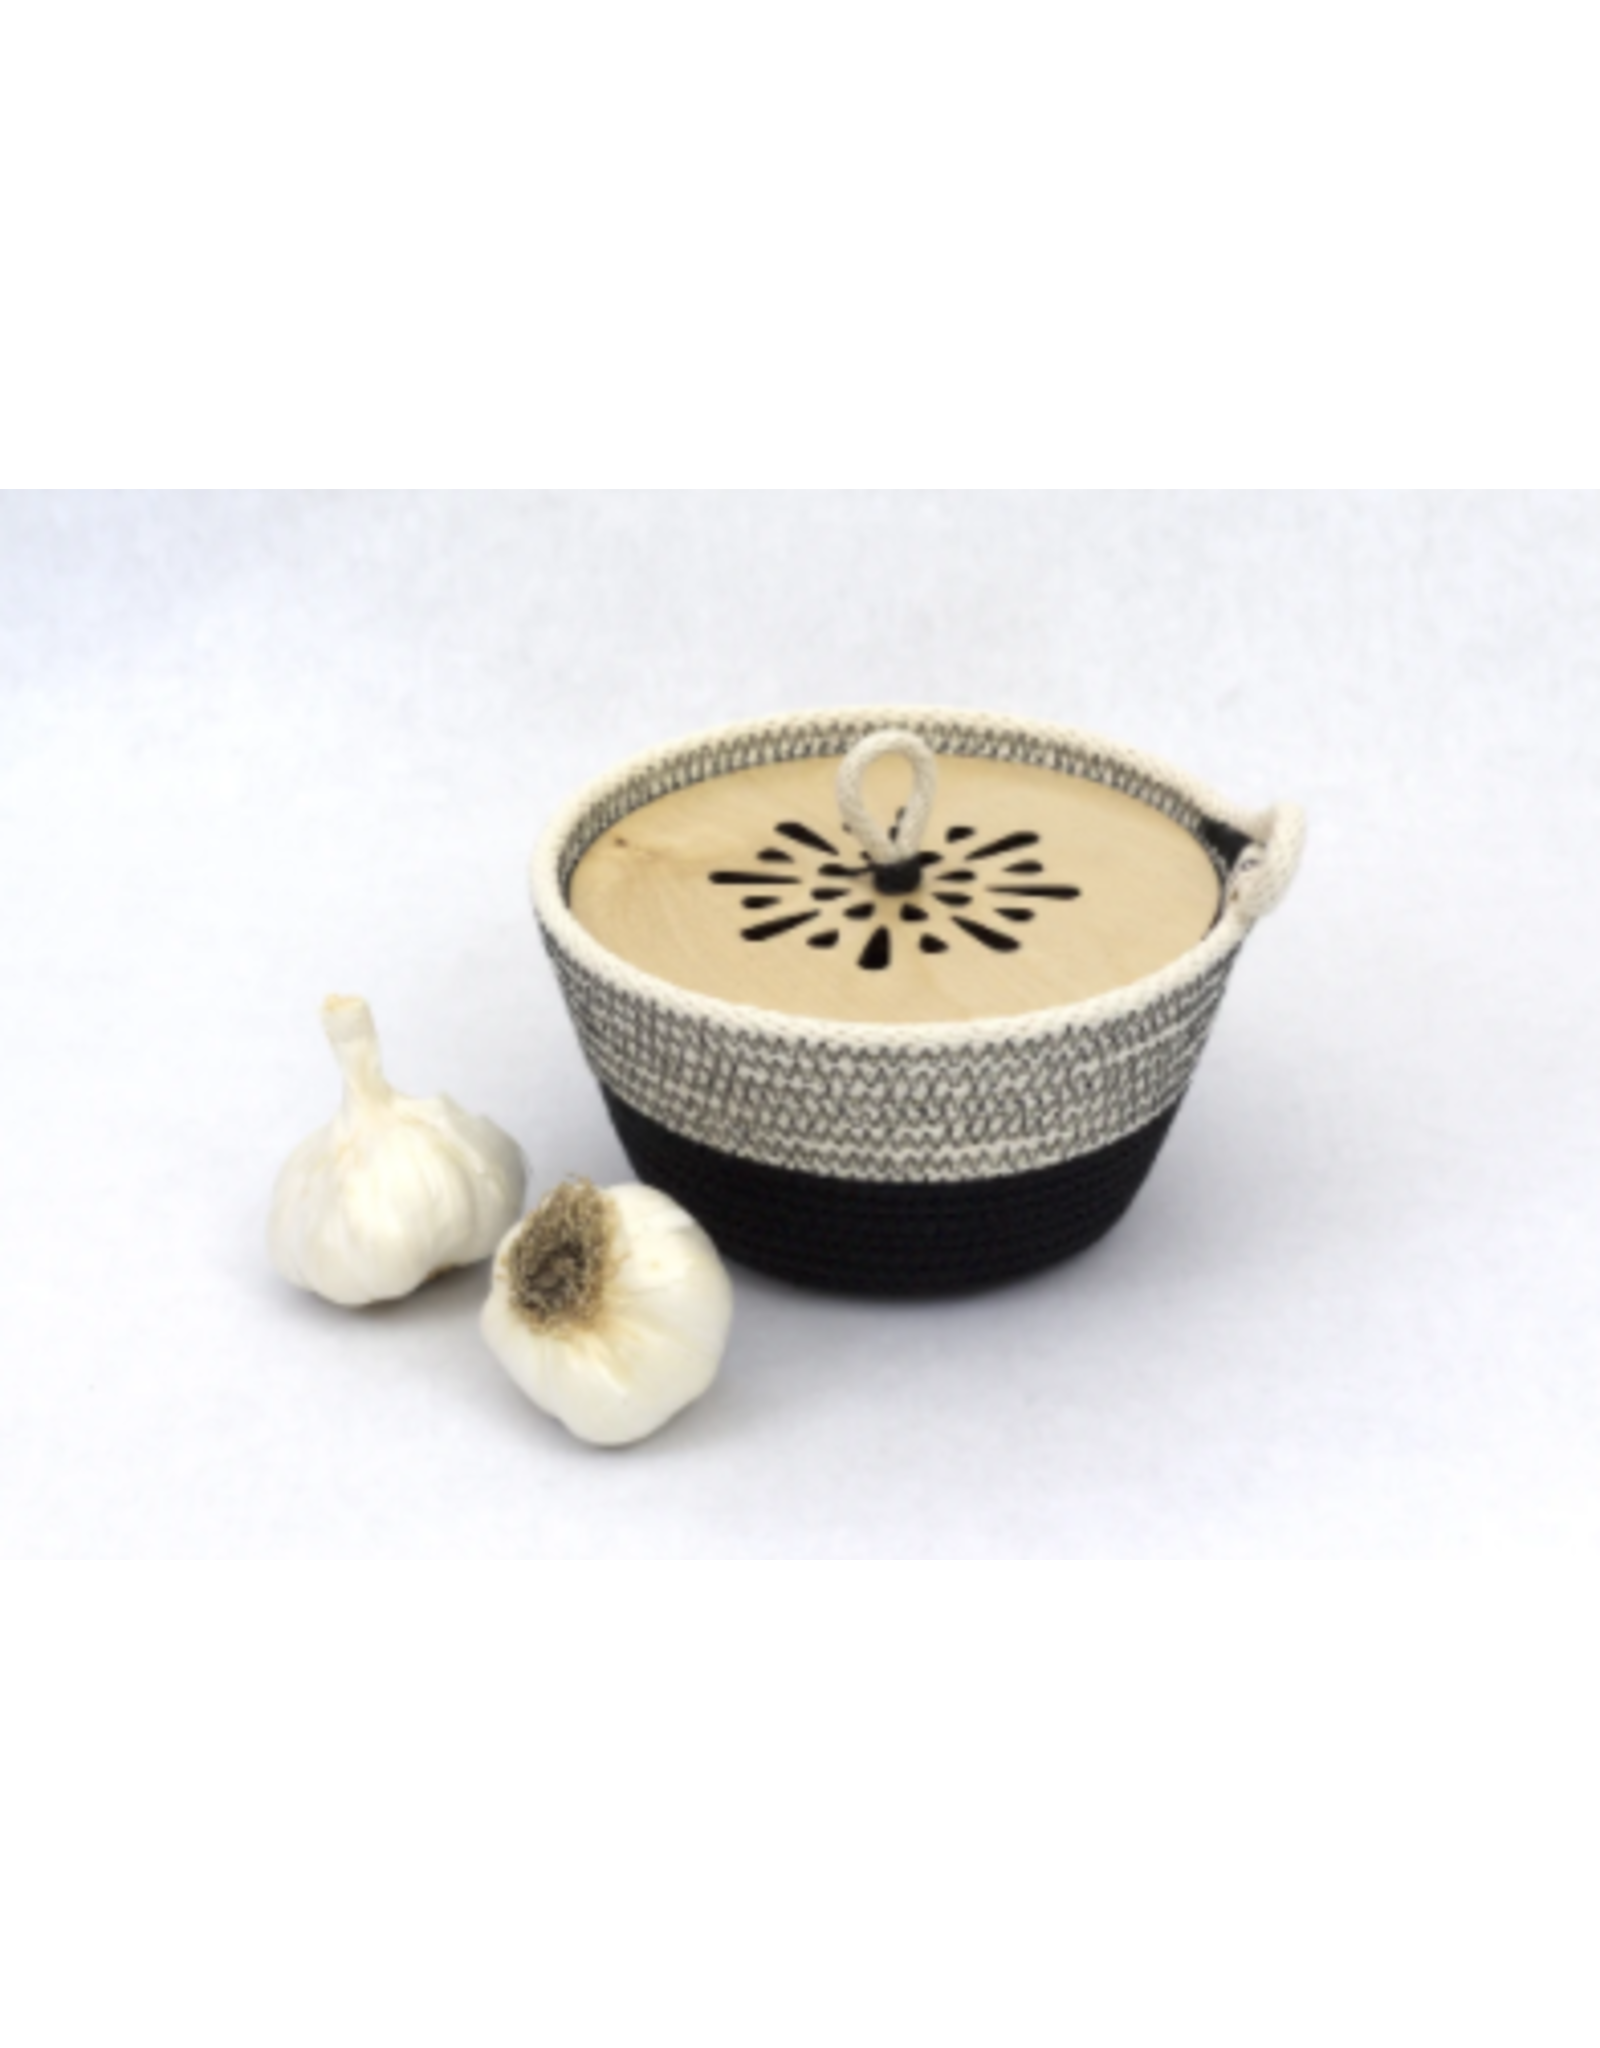 Woven Grey Garlic Bowl with Wooden Lid